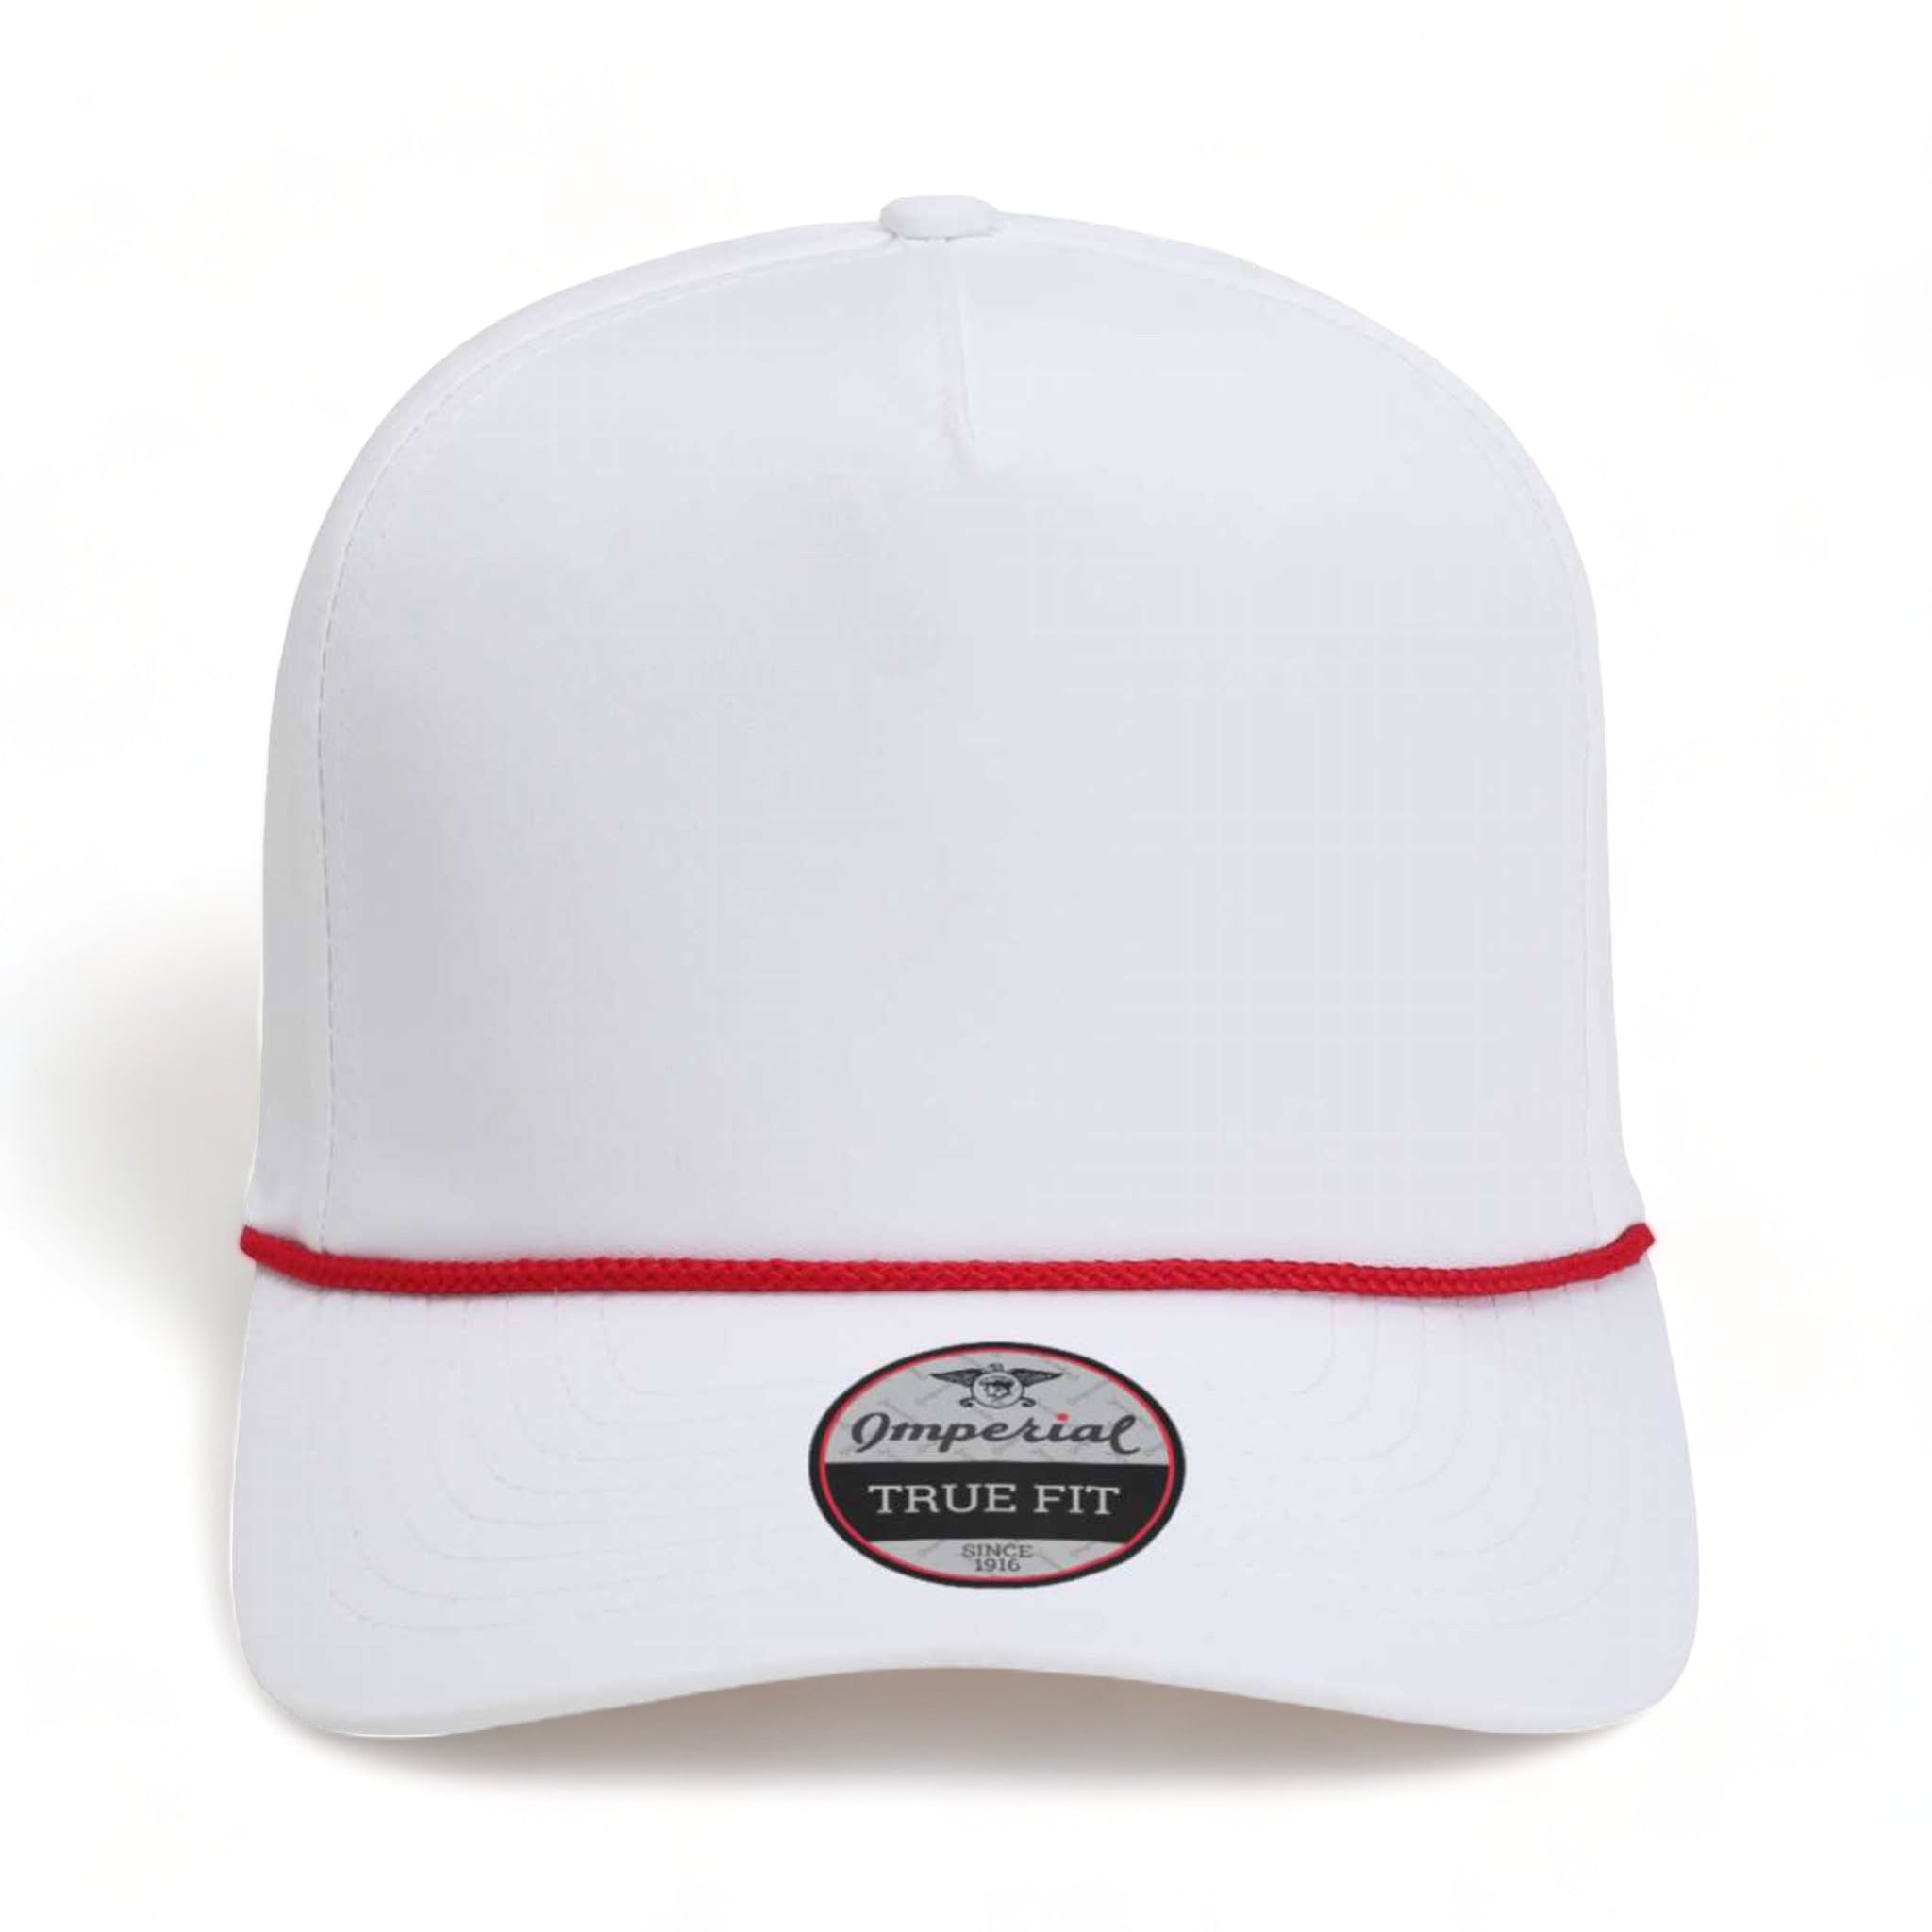 Front view of Imperial 5054 custom hat in white and red